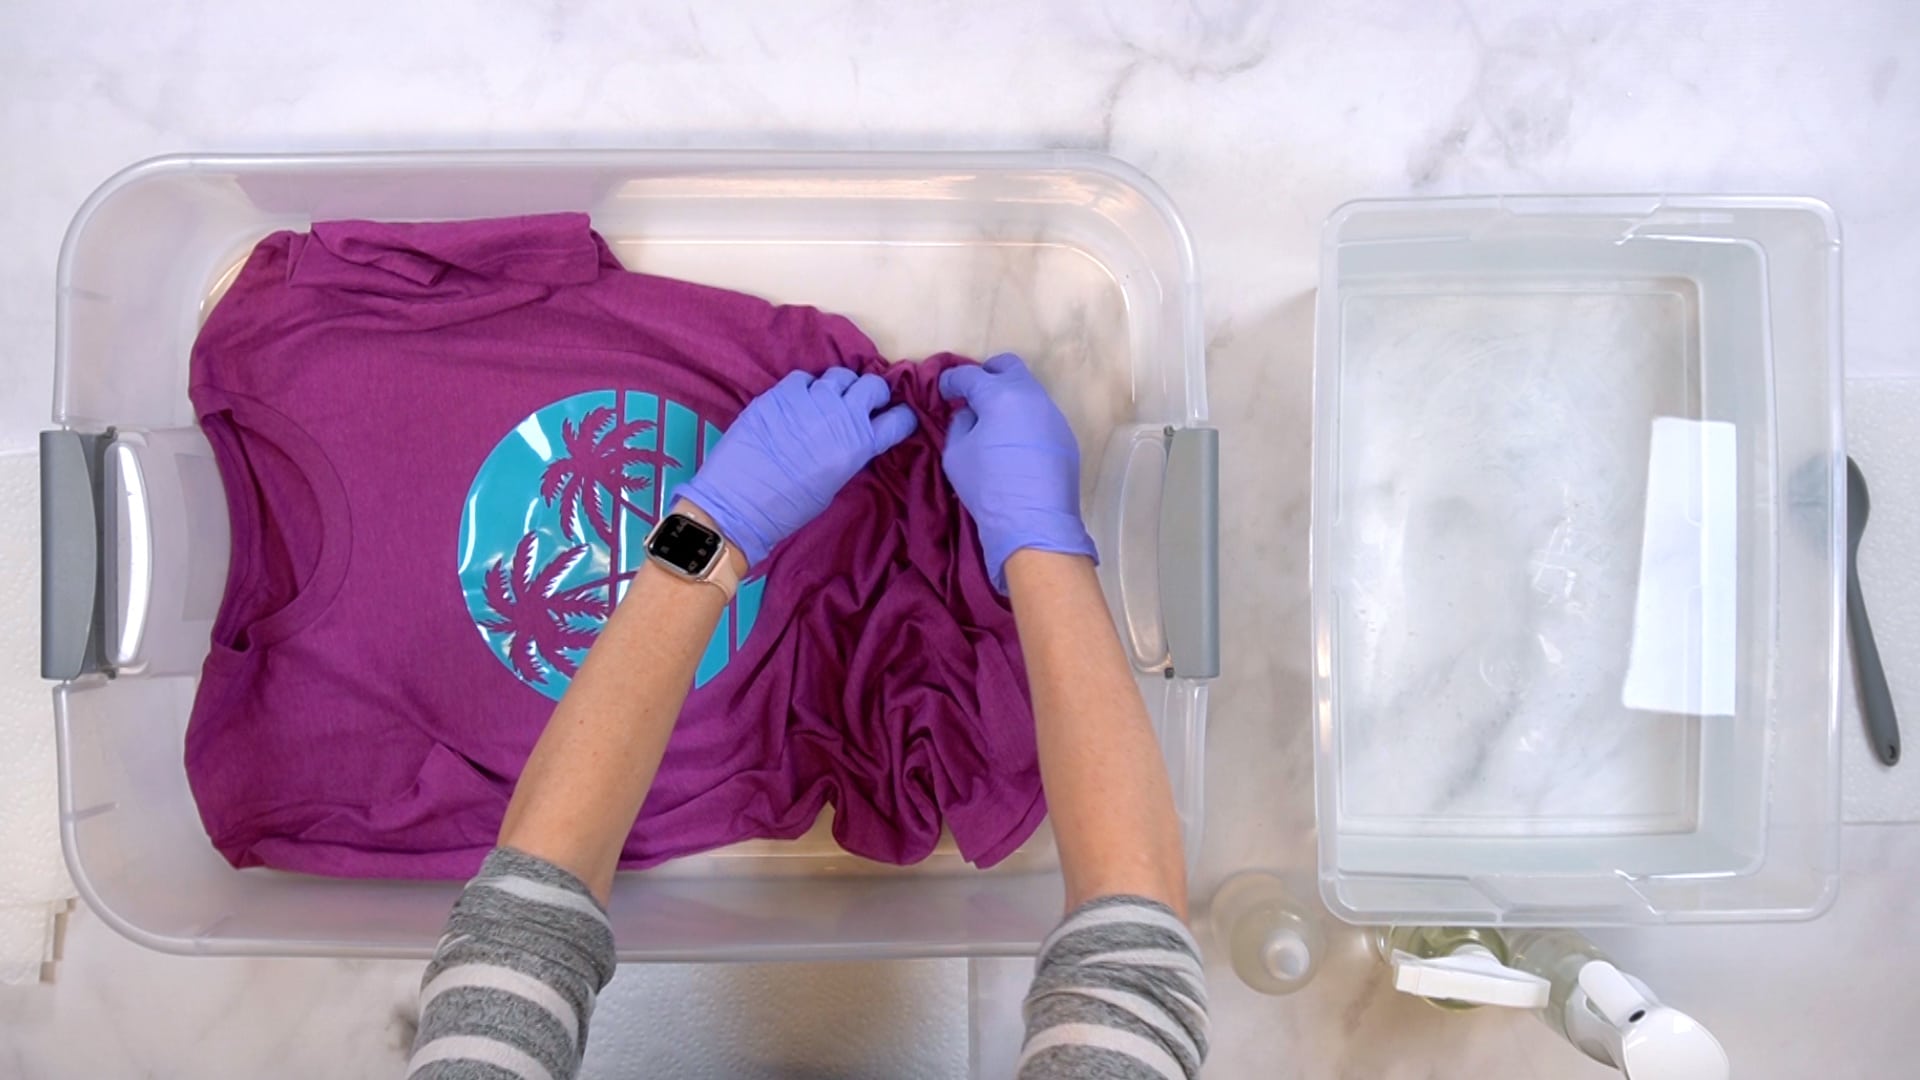 Hands wearing purple gloves scrunching up a purple shirt in a plastic tub